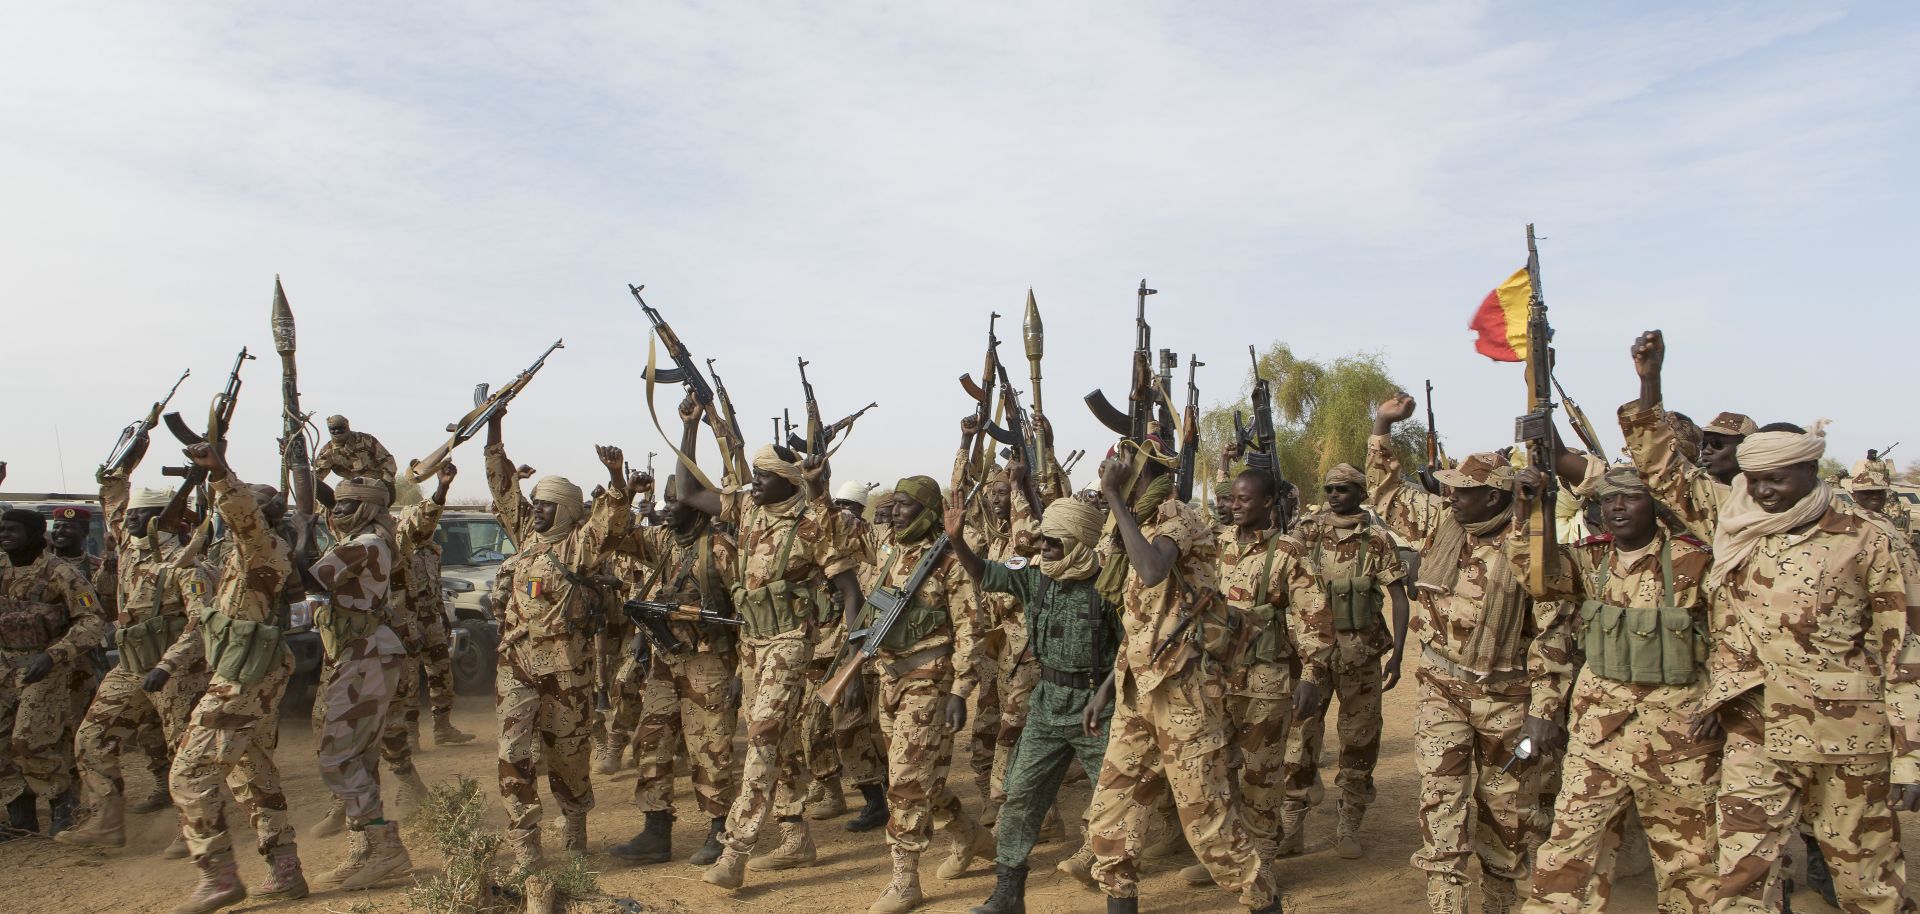 Members of the Chadian Army raise their weapons.